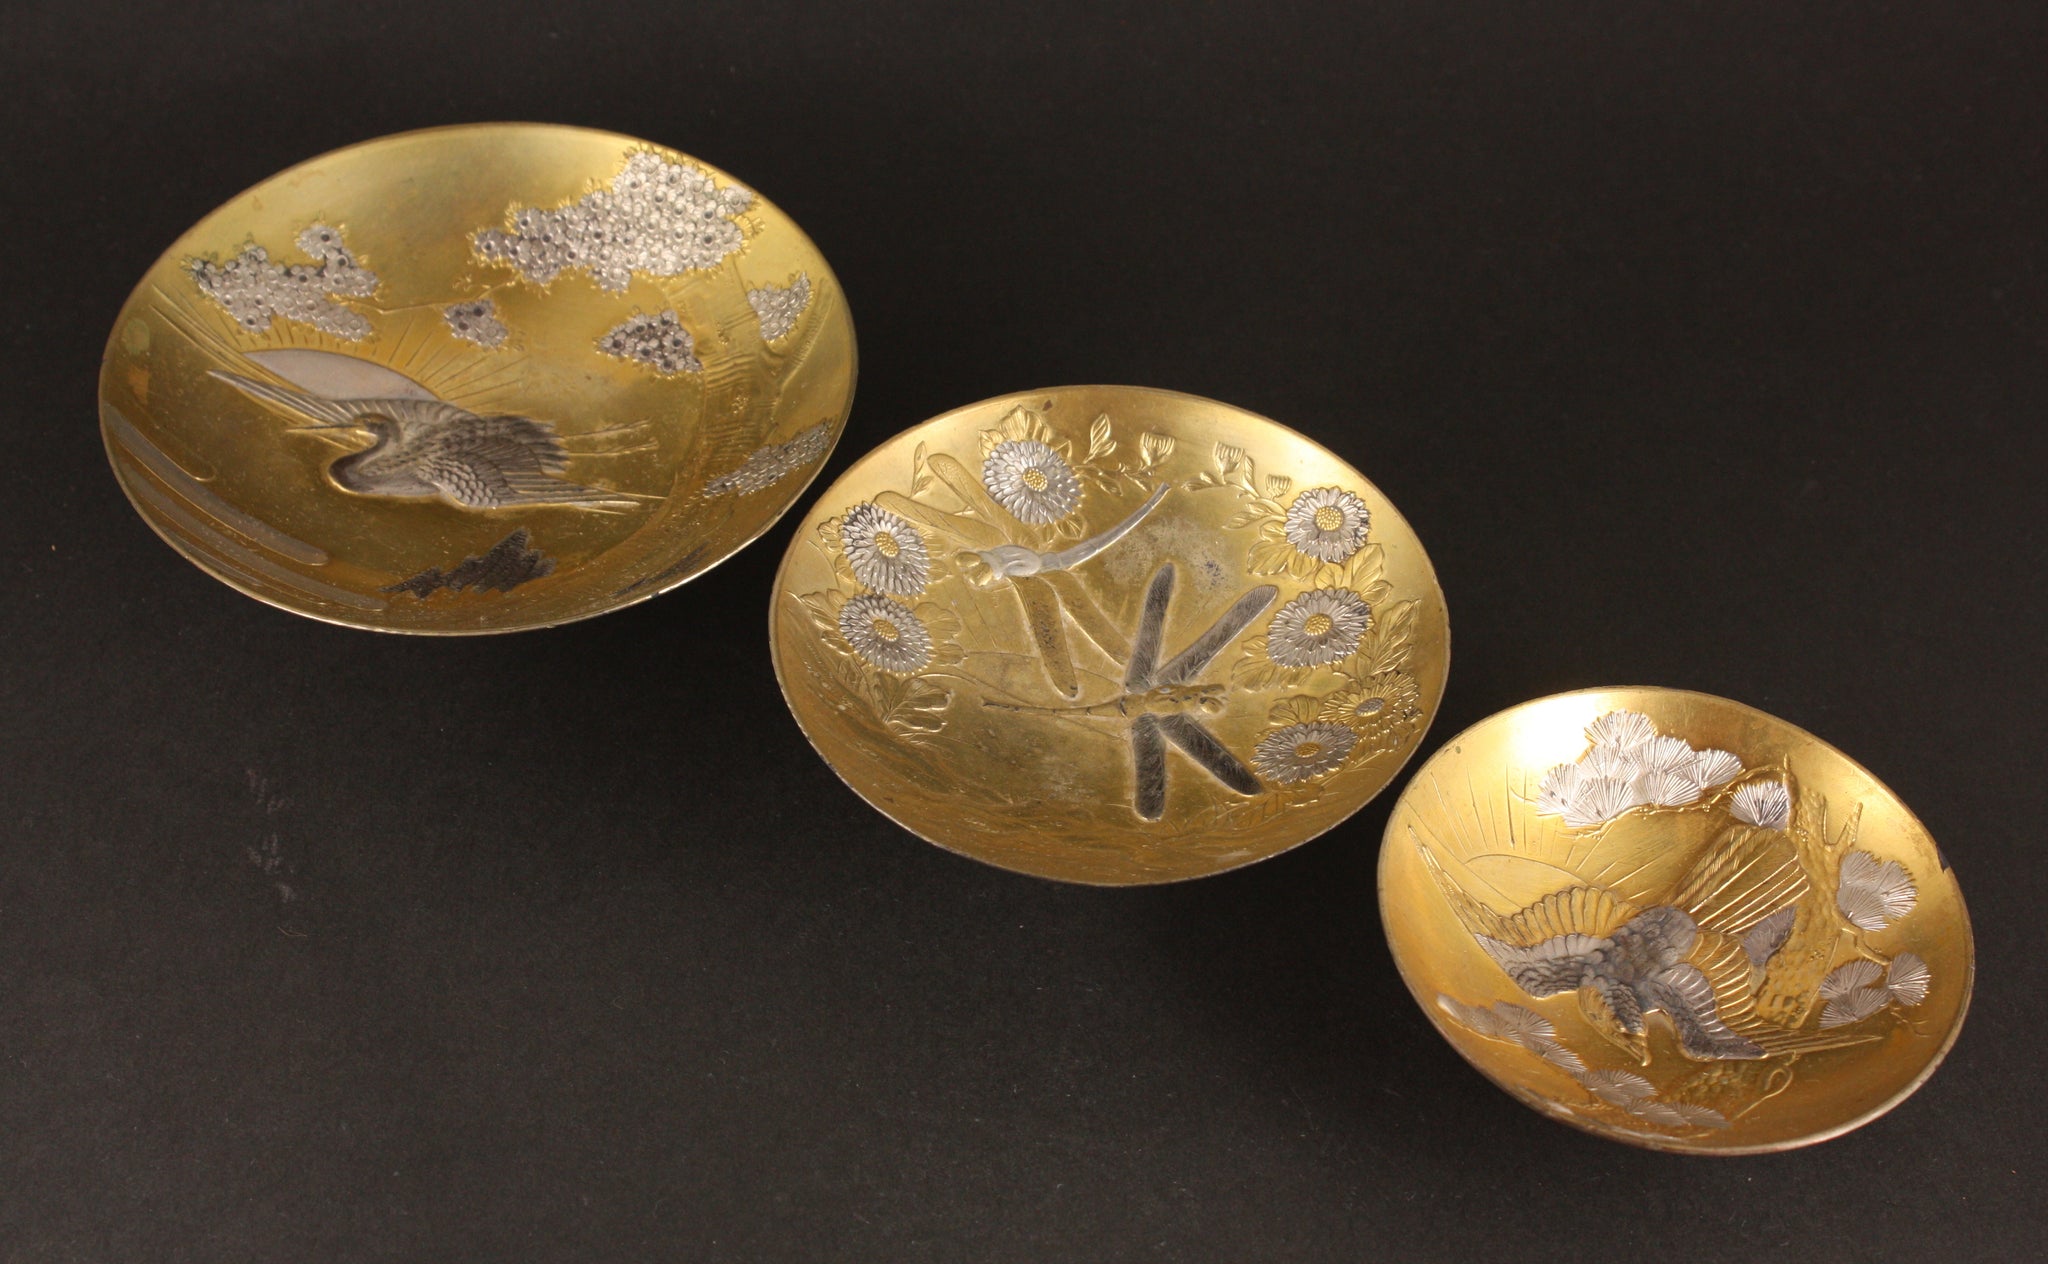 Exquisite Russo Japanese War Victory Metal Sake Cup Set